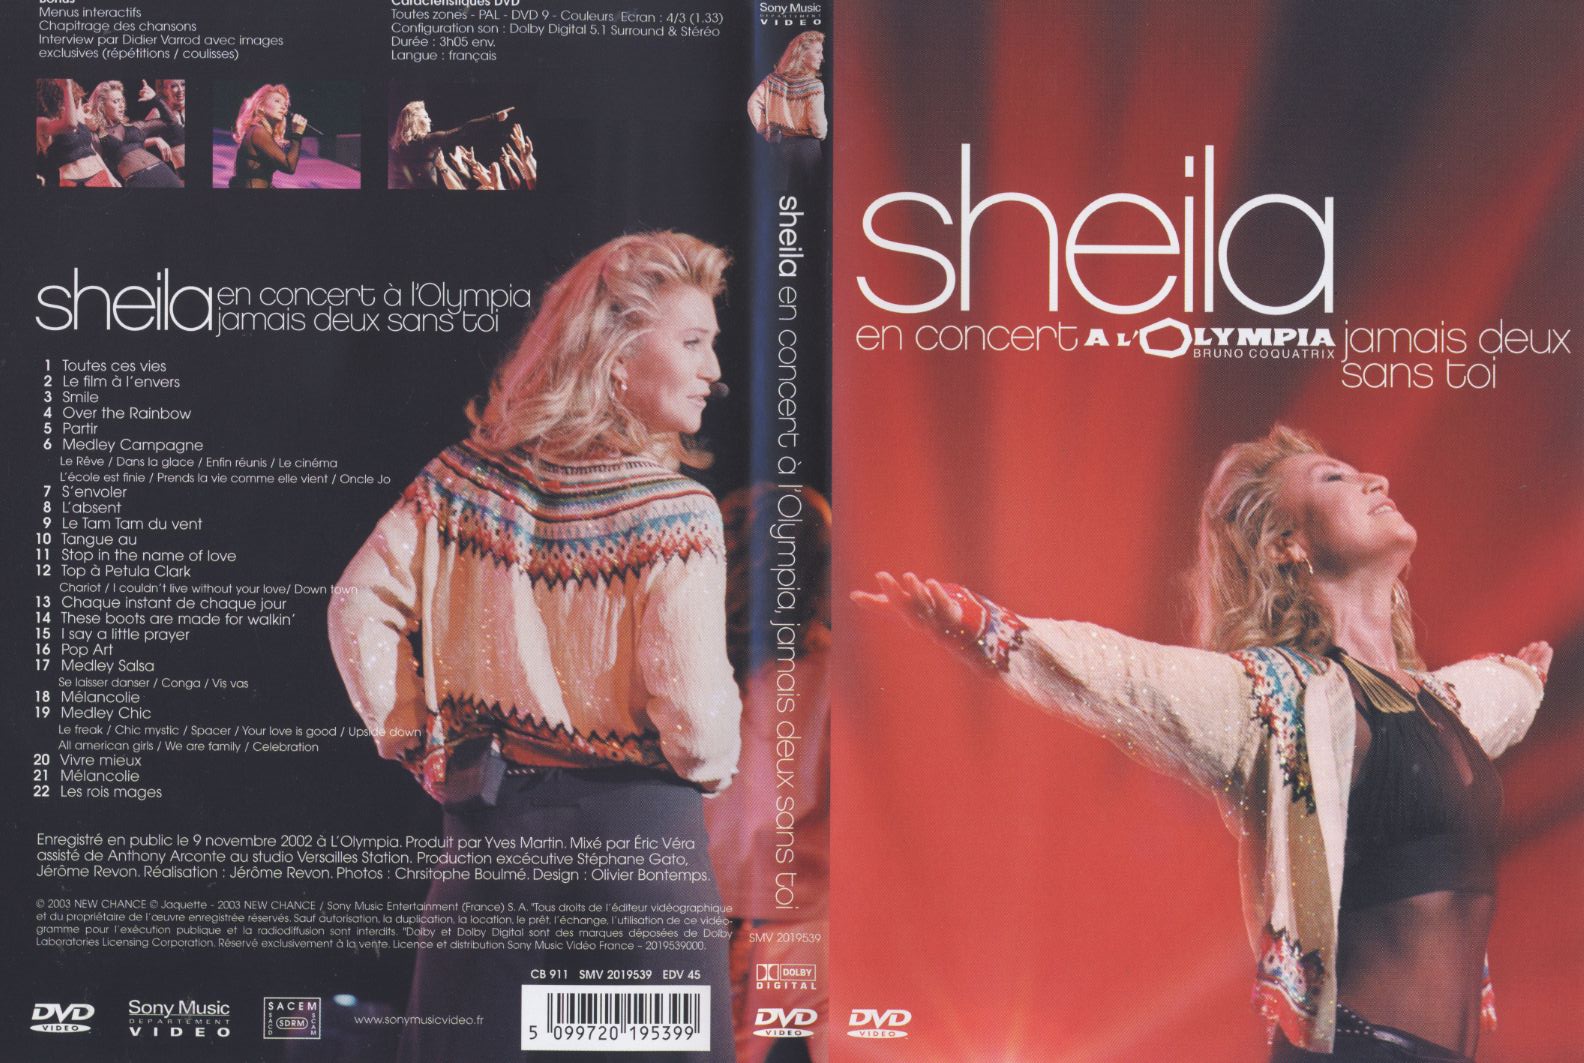 Jaquette DVD Sheila - Olympia 2002